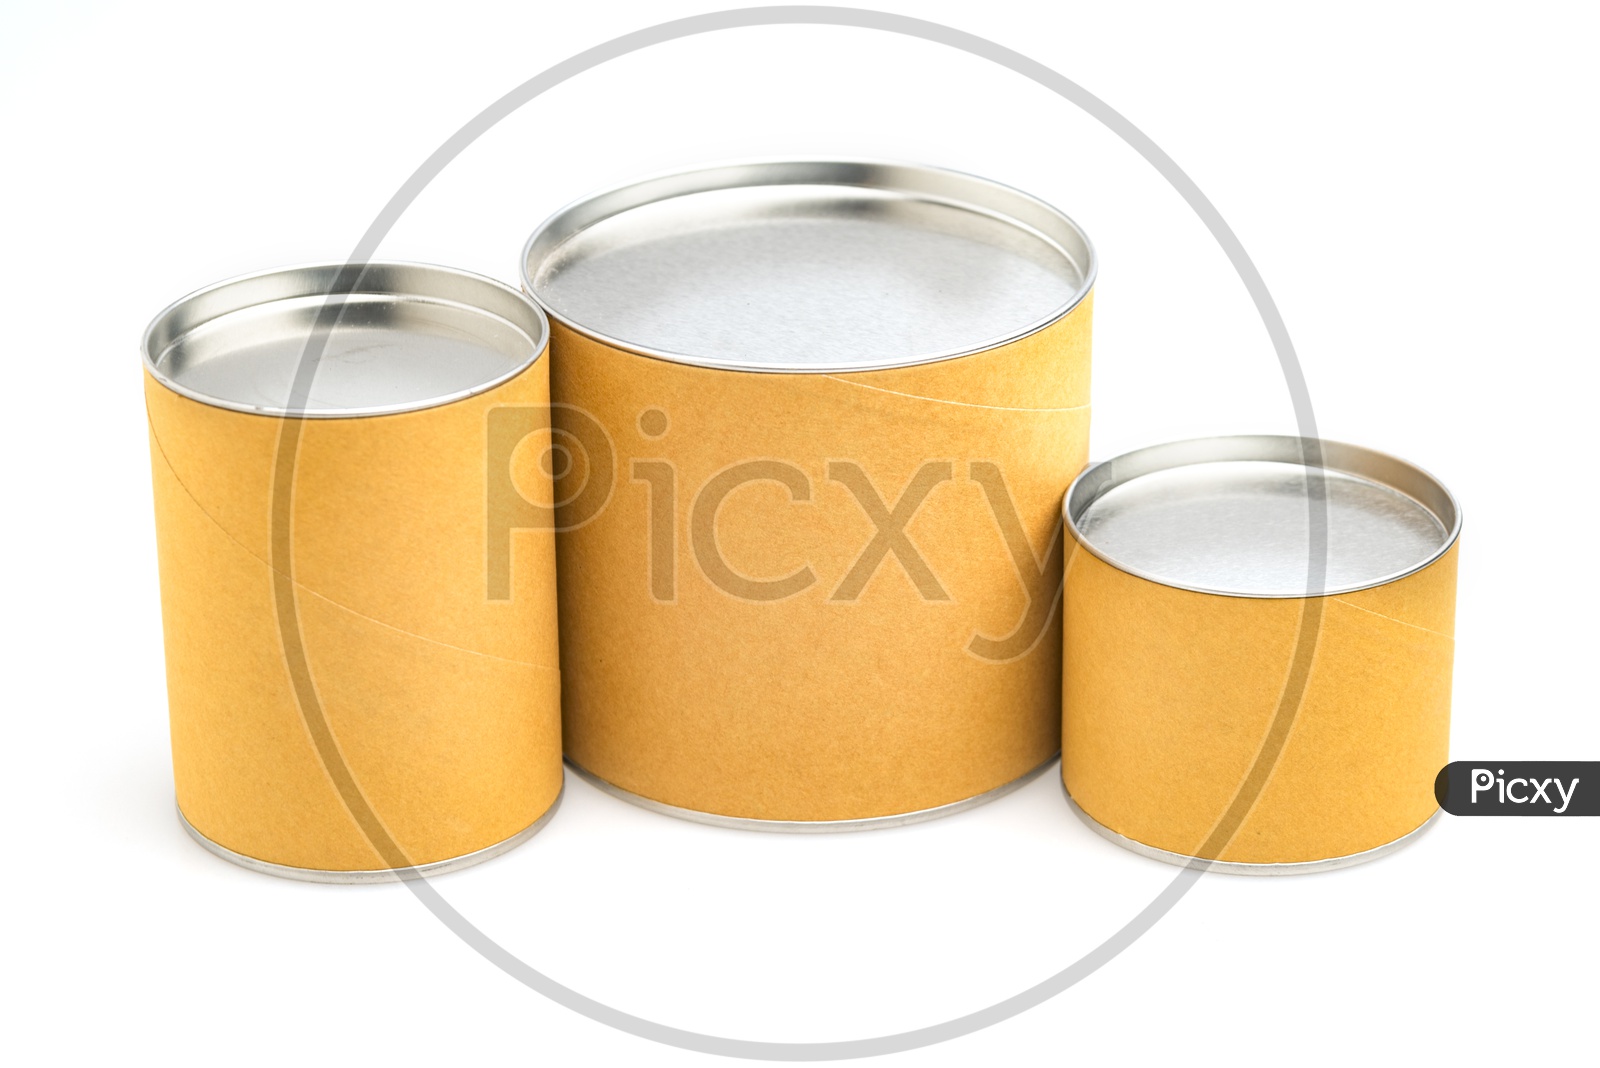 Paper Cylinder Containers  isolated on white background